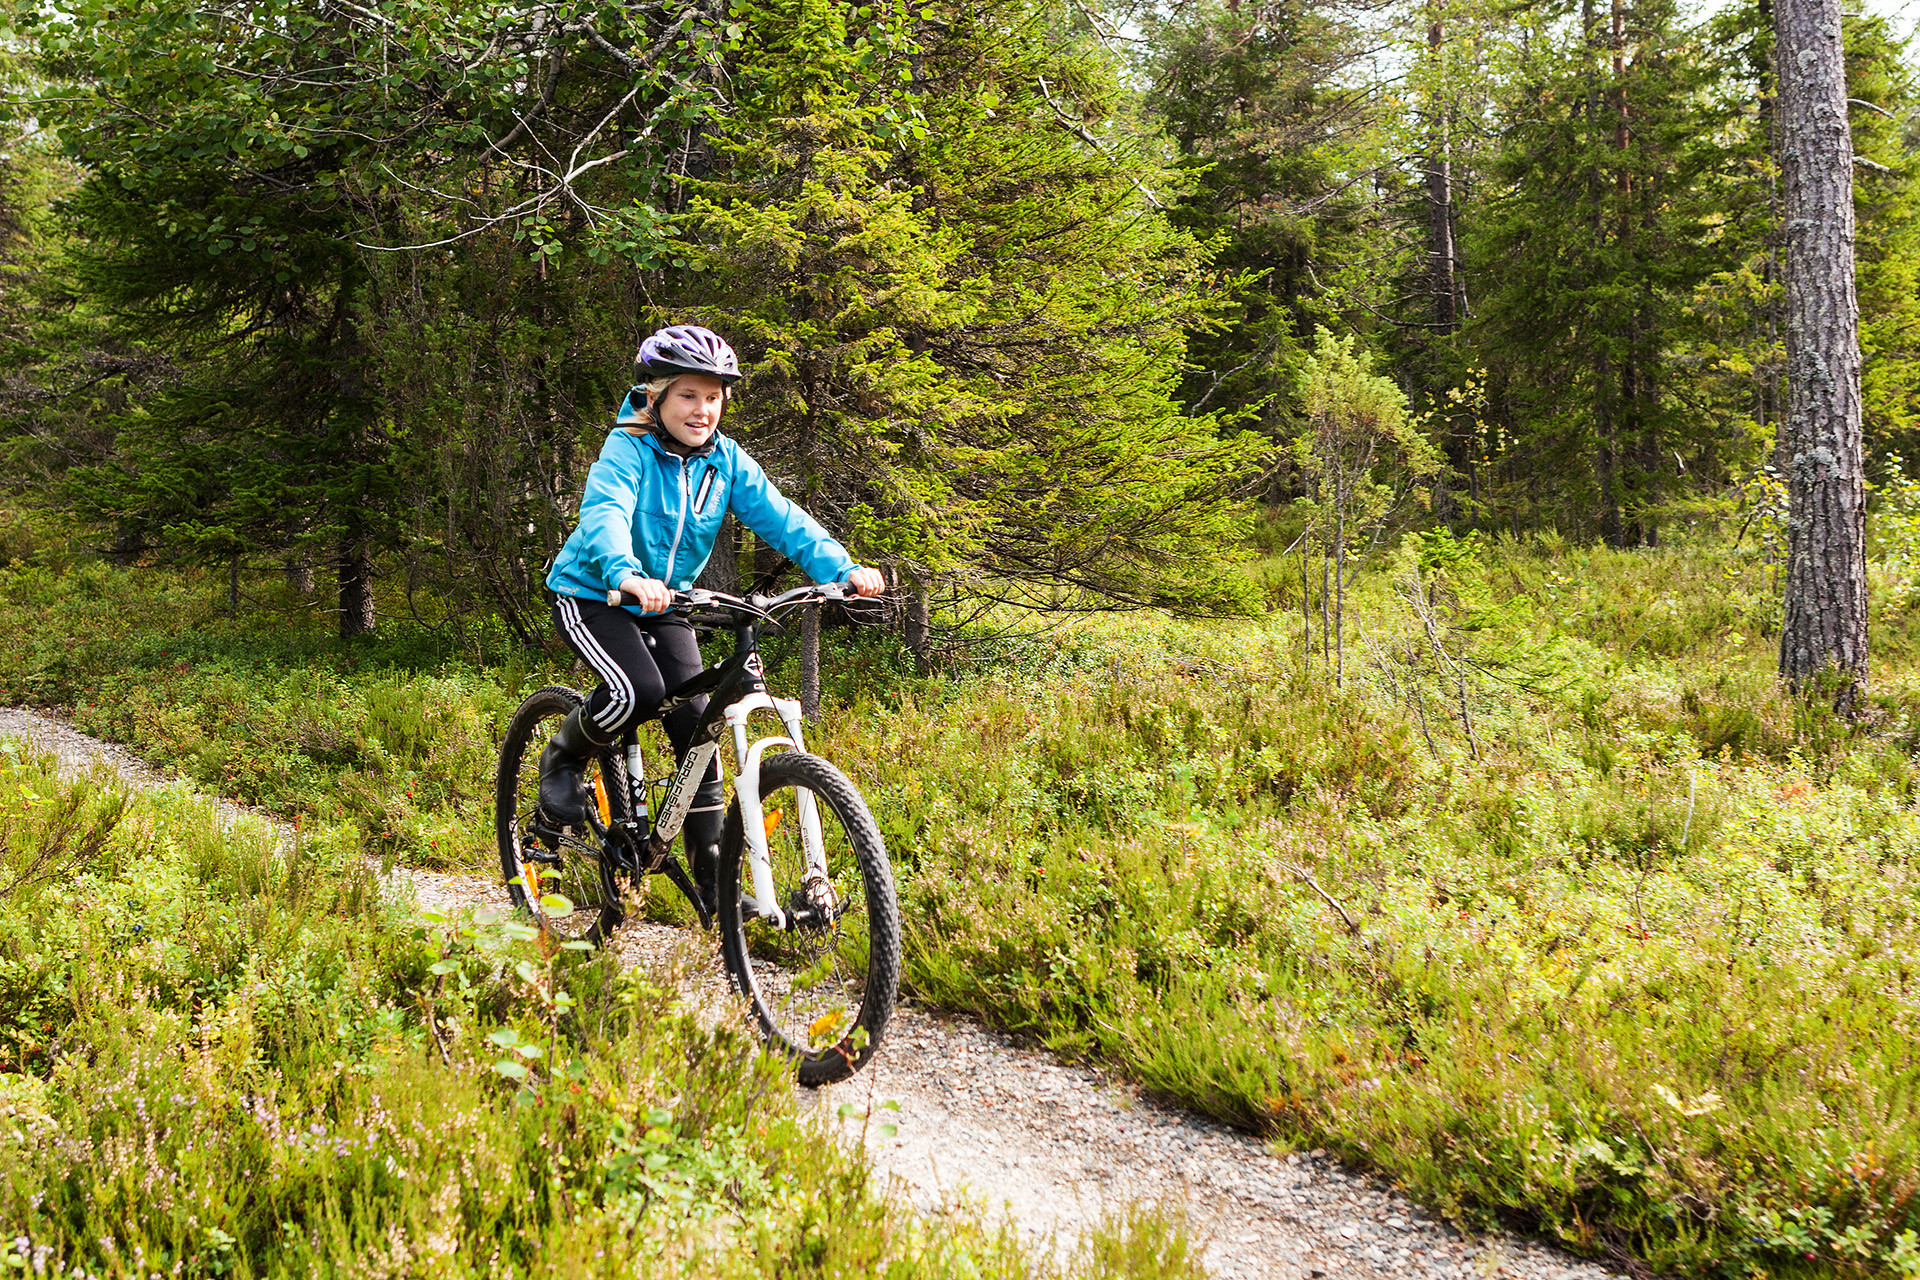 Pikku-Syöte offers exceptional trails and sceneries for Mountain Biking around the year.